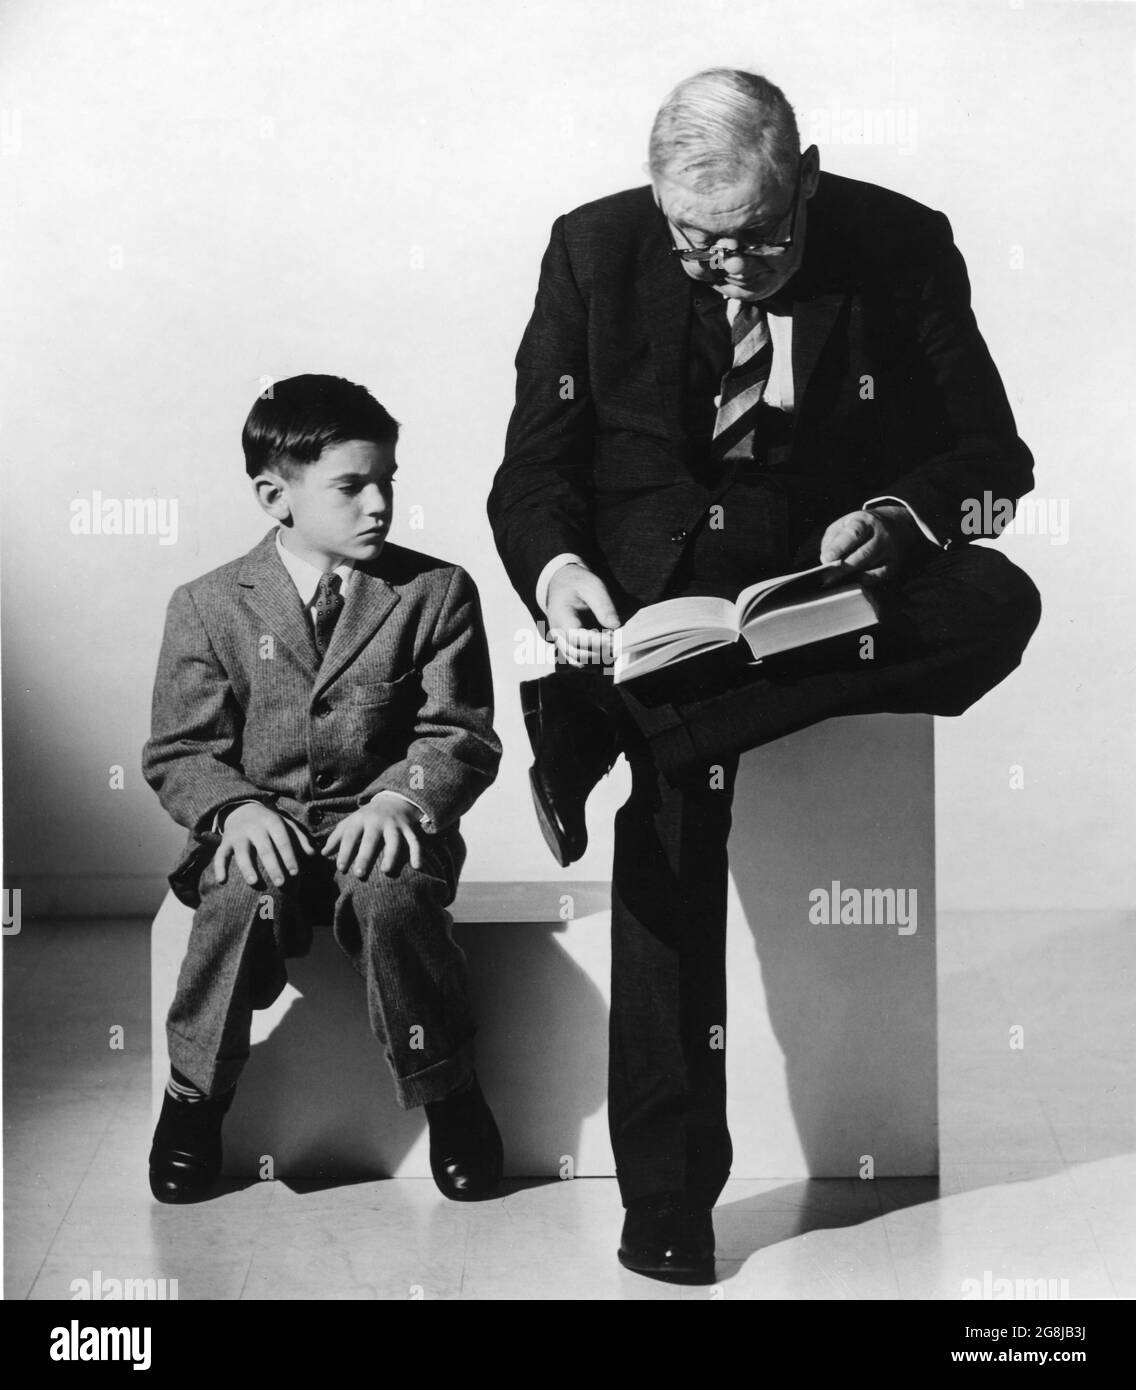 CHARLES LAUGHTON with Young Boy 1960 Publicity Portrait by JOHN ENGSTEAD for his US Reading Tour One Man Show Stock Photo